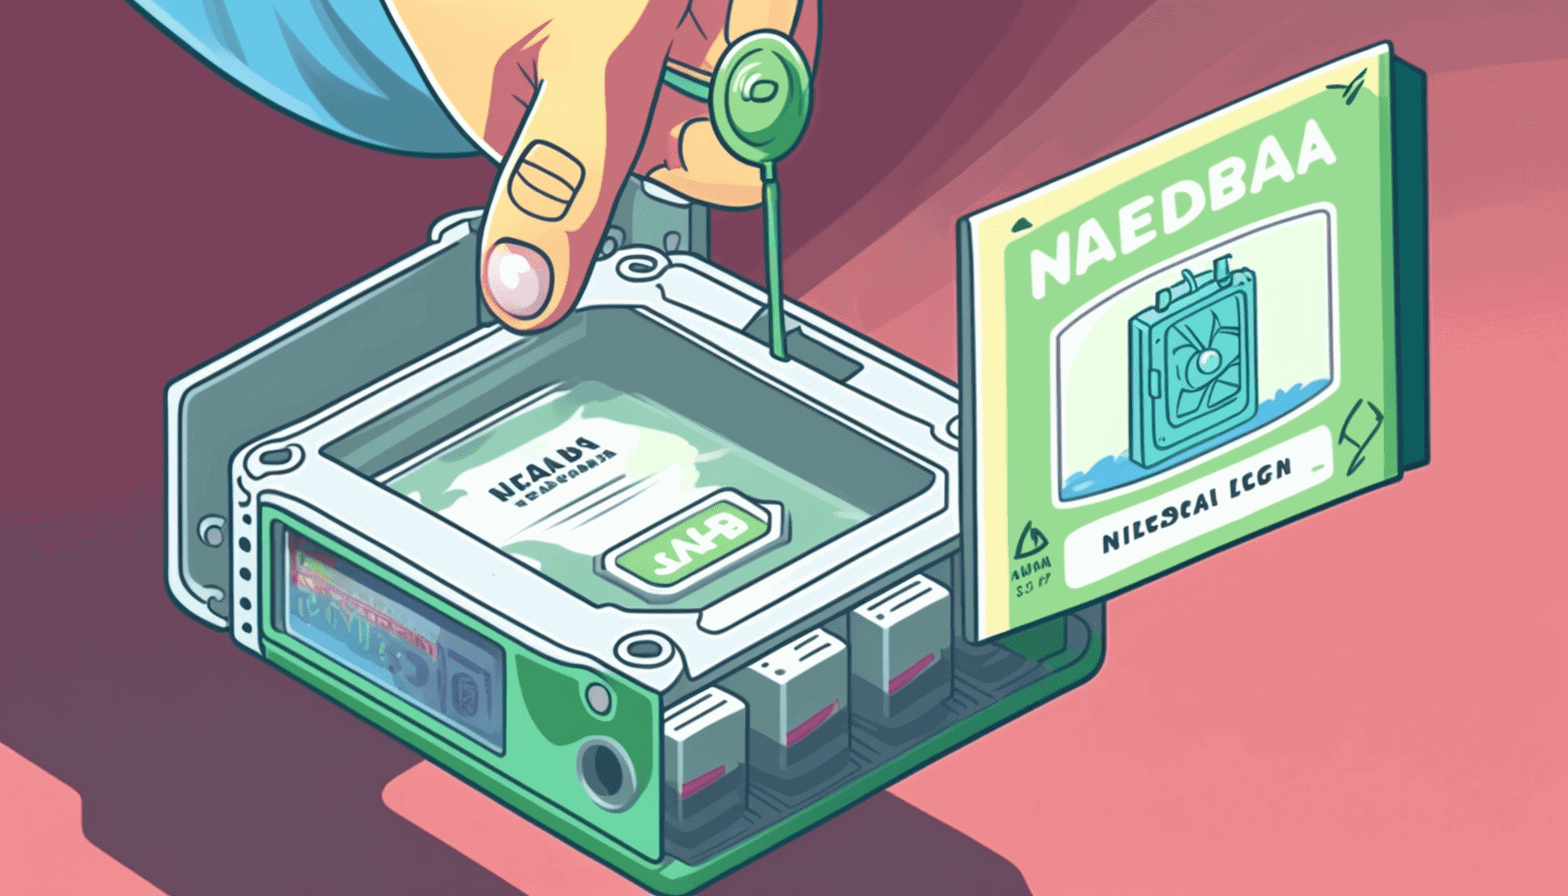 A cartoon illustration of a person holding a Nebra Helium Miner with an open panel revealing the SD card slot and the steps of the guide appearing as a guidebook floating above the device.